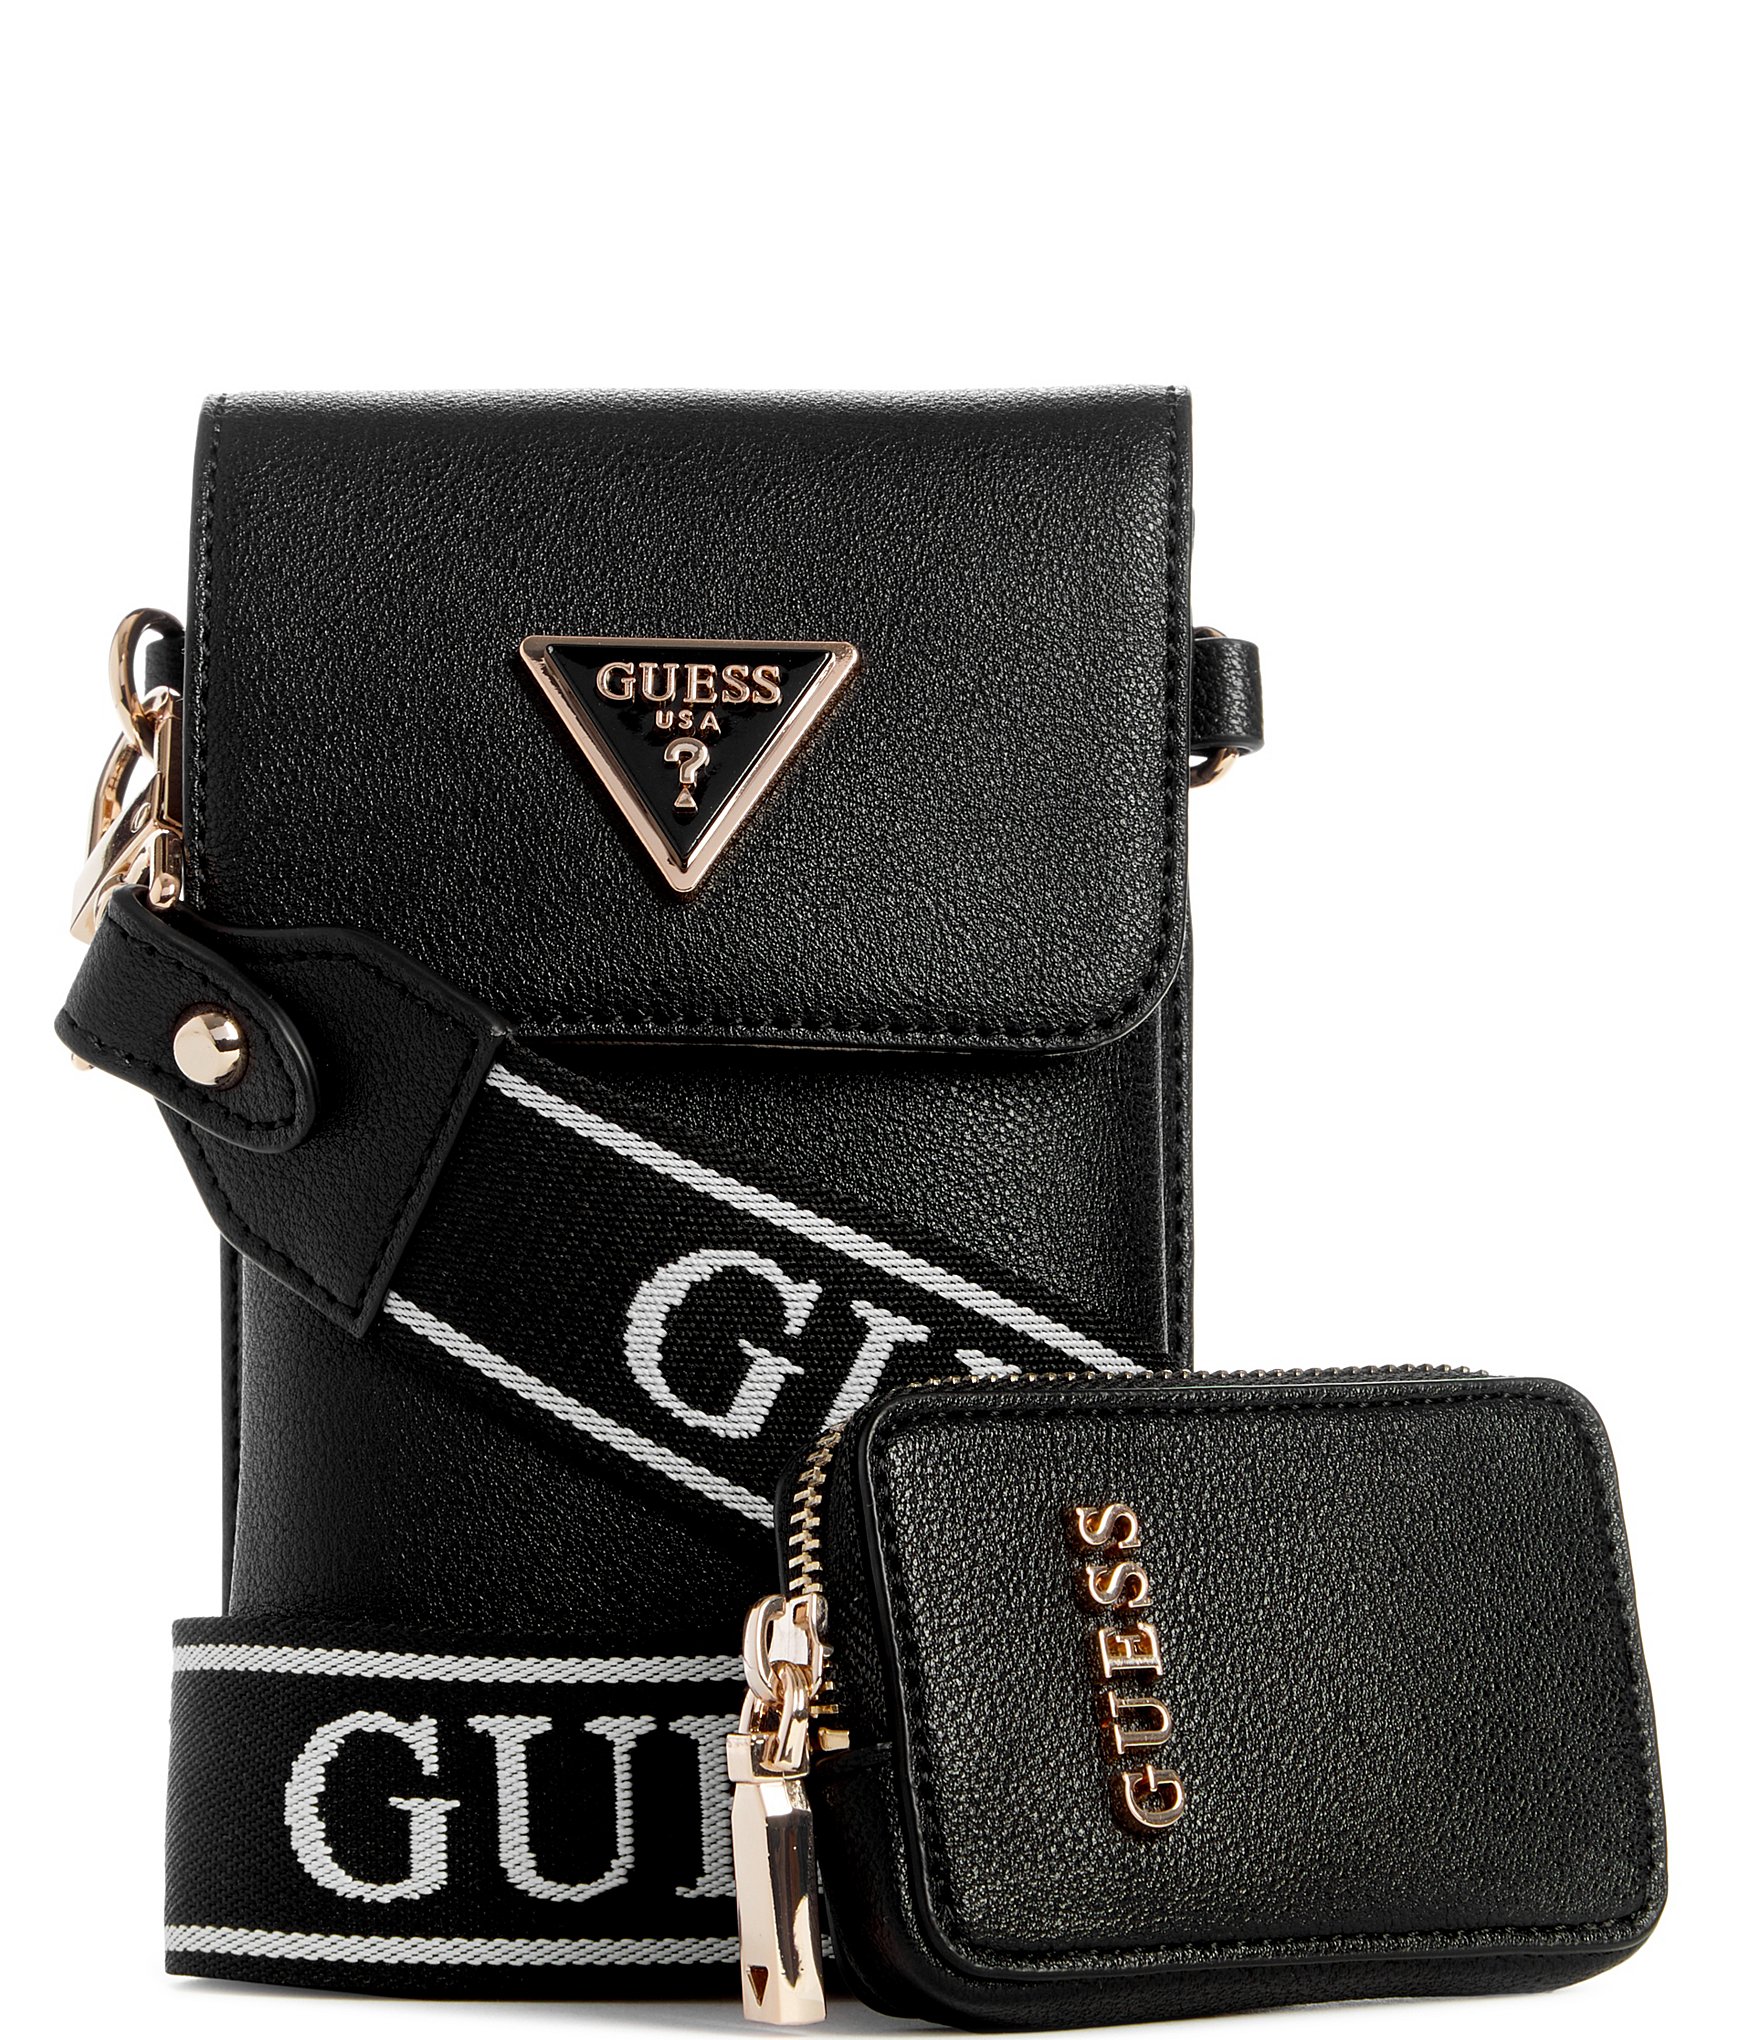 Guess Bag 💗 | Girly bags, Luxury bags collection, Trendy purses